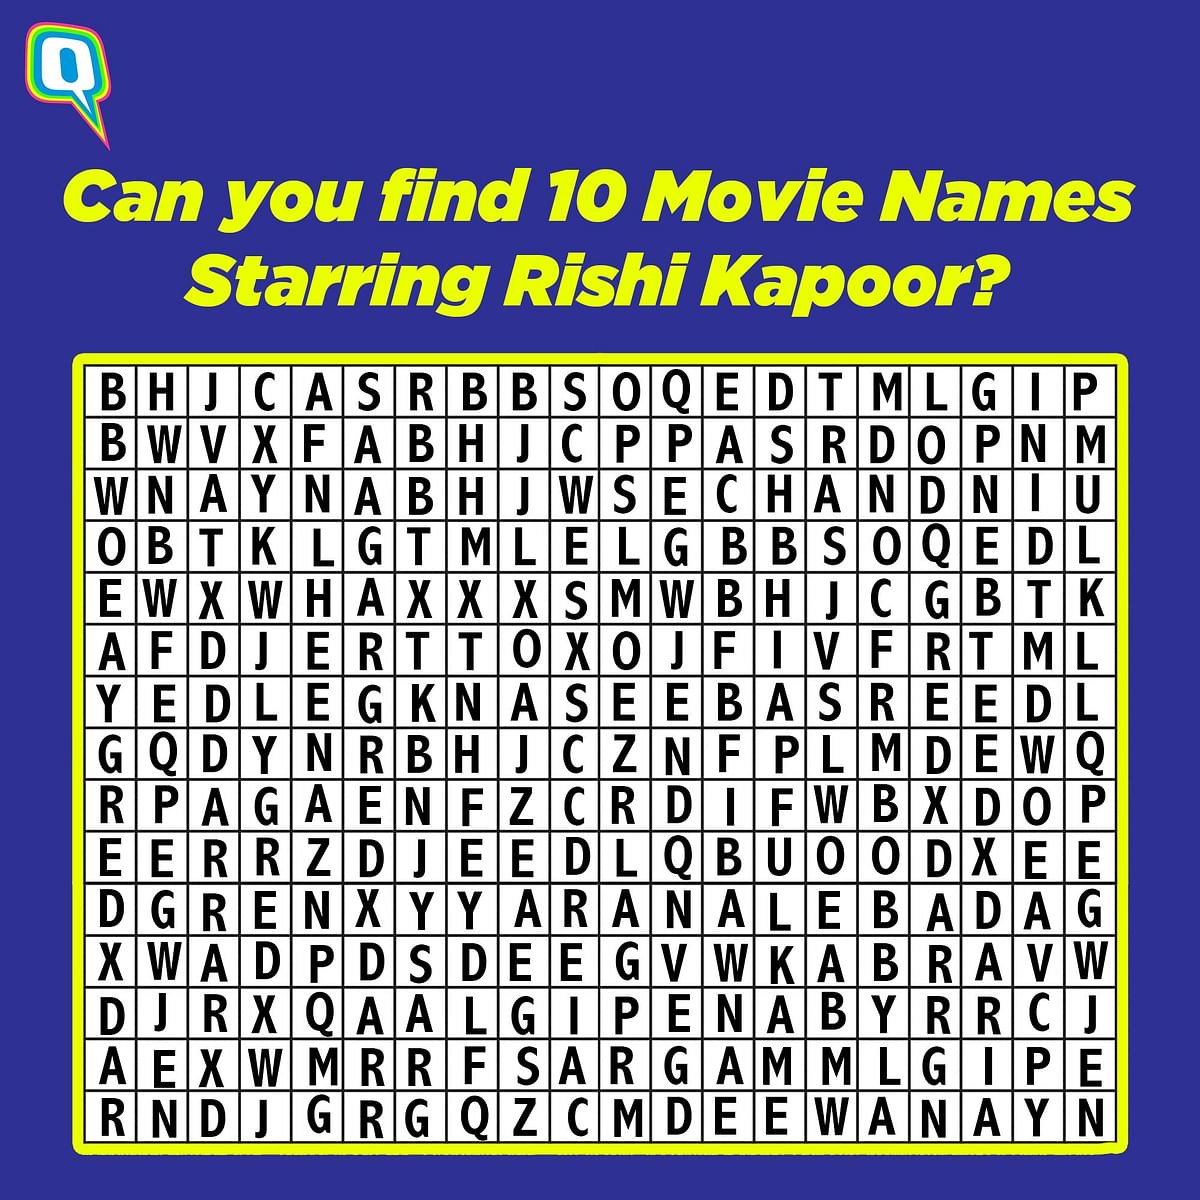 Can you guess names of movies starring Rishi Kapoor?